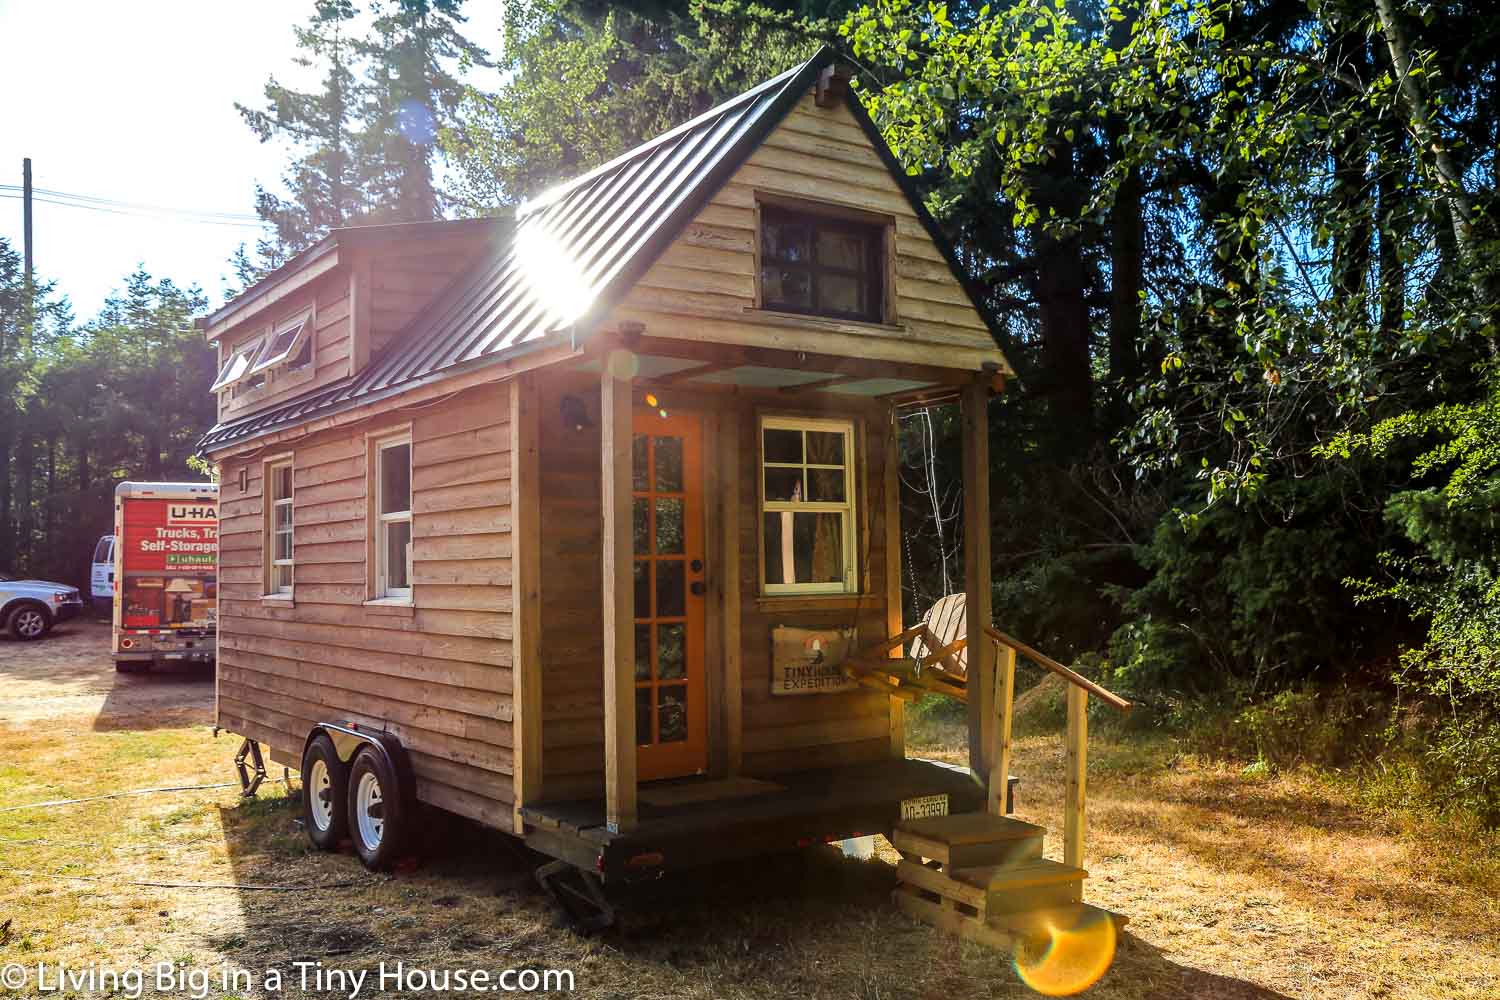 https://www.livingbiginatinyhouse.com/media/website_pages/tiny-house-tours/worlds-most-traveled-tiny-house/TINY-HOUSE-EXPEDITION-1-of-7.jpg